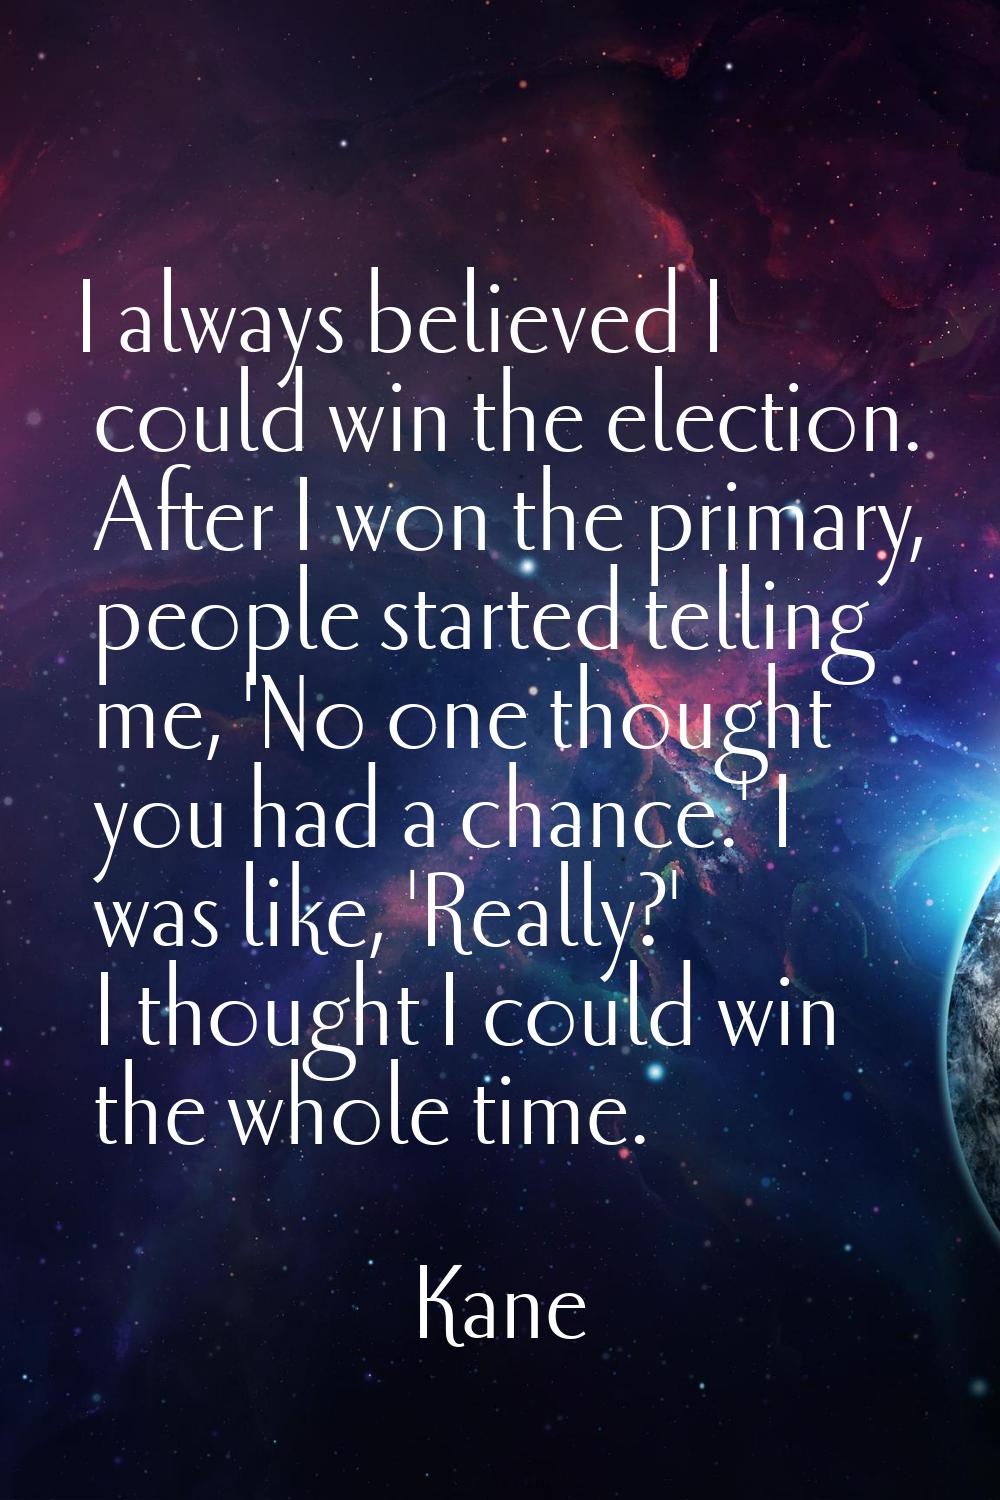 I always believed I could win the election. After I won the primary, people started telling me, 'No